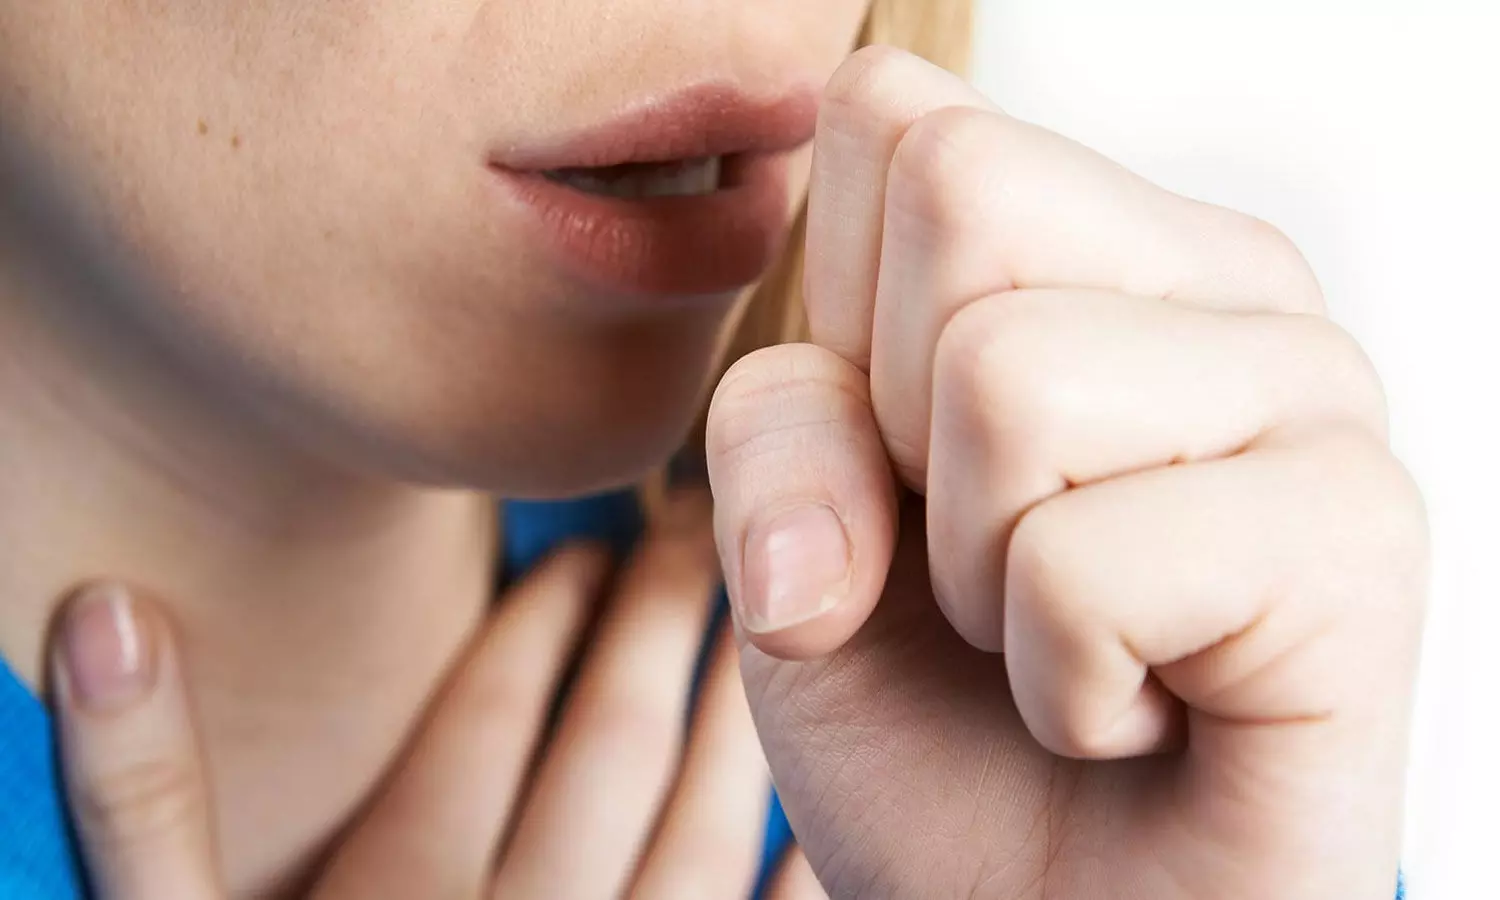 KalobaTUSS may reduce severity and duration of cough in children, Finds study